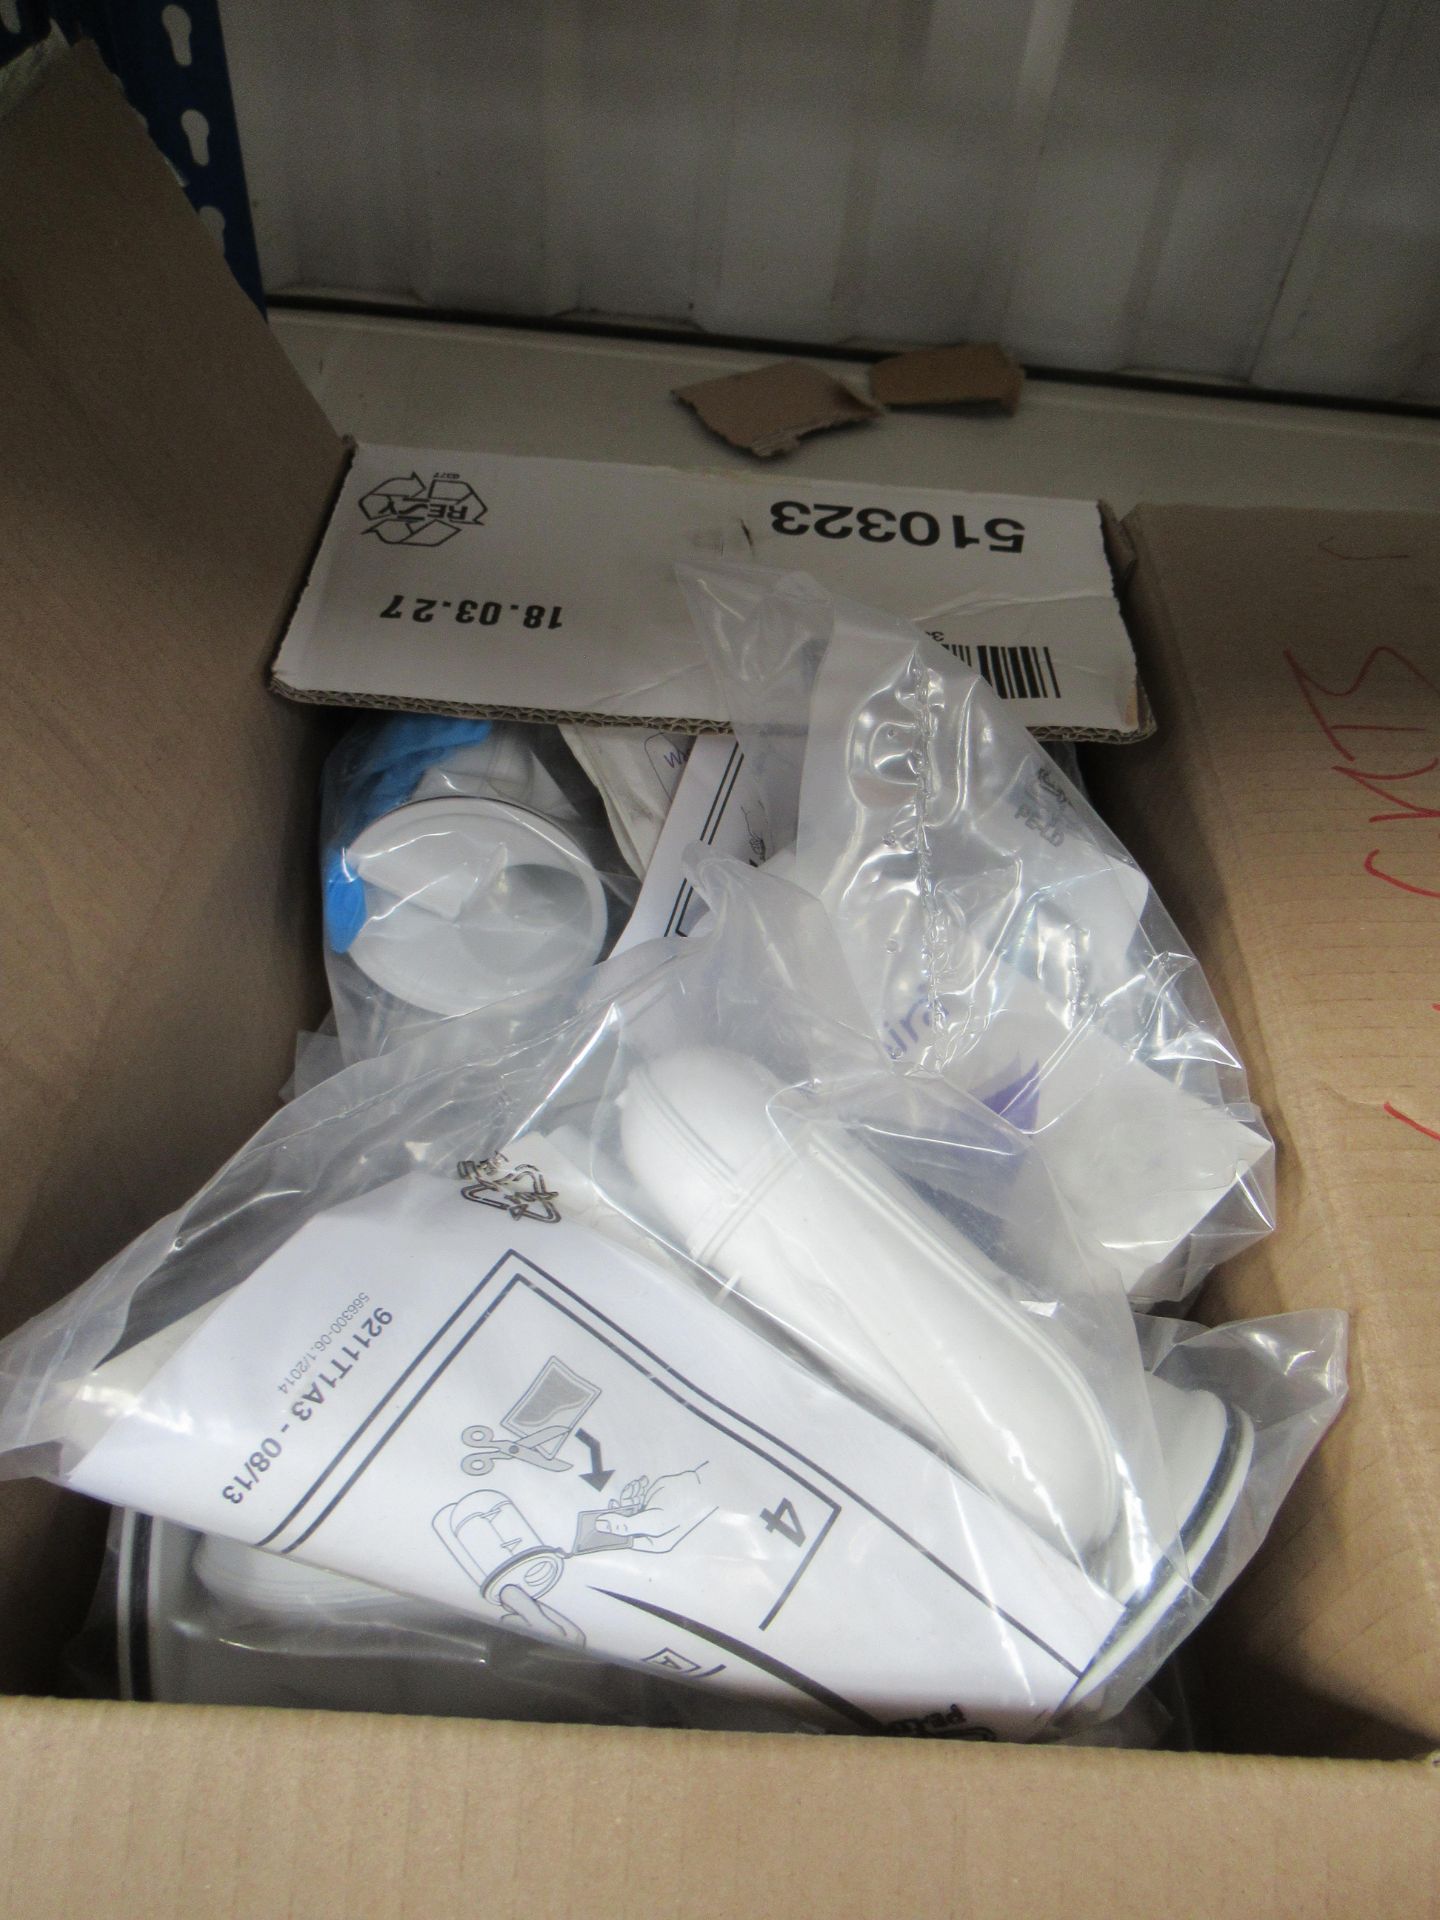 5 x Villeroy and Boch Electrically Controlled Drain Valves and 1 box of fittings - Bild 3 aus 6